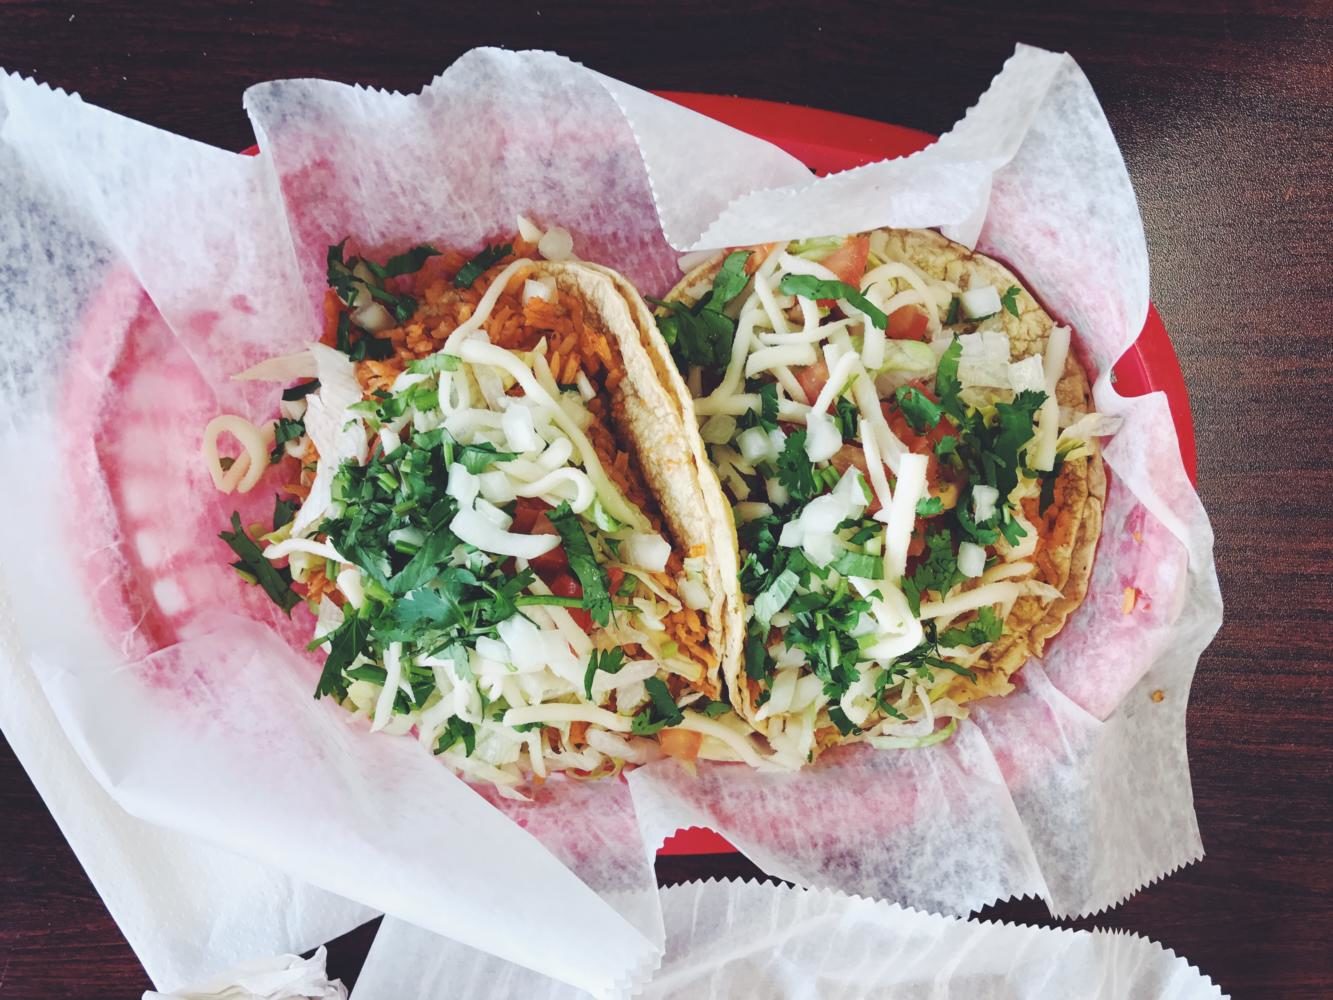 This+is+a+traditional+Mexican+taco%2C+that+you+can+purchase+at+Arturos.